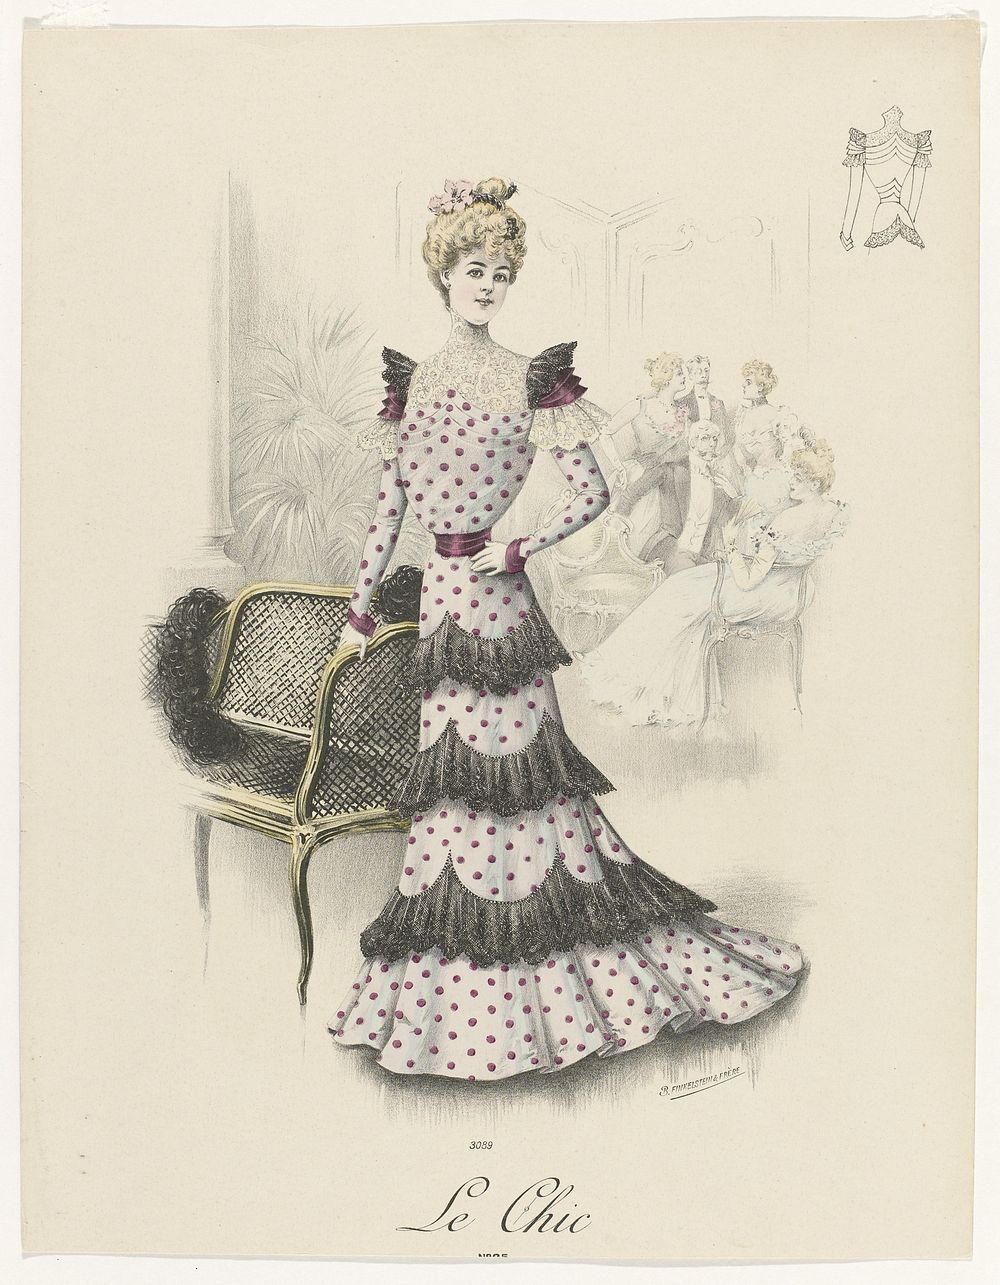 Le Chic, 1900, No. 2089 (c. 1900) by B Finkelstein and Frère